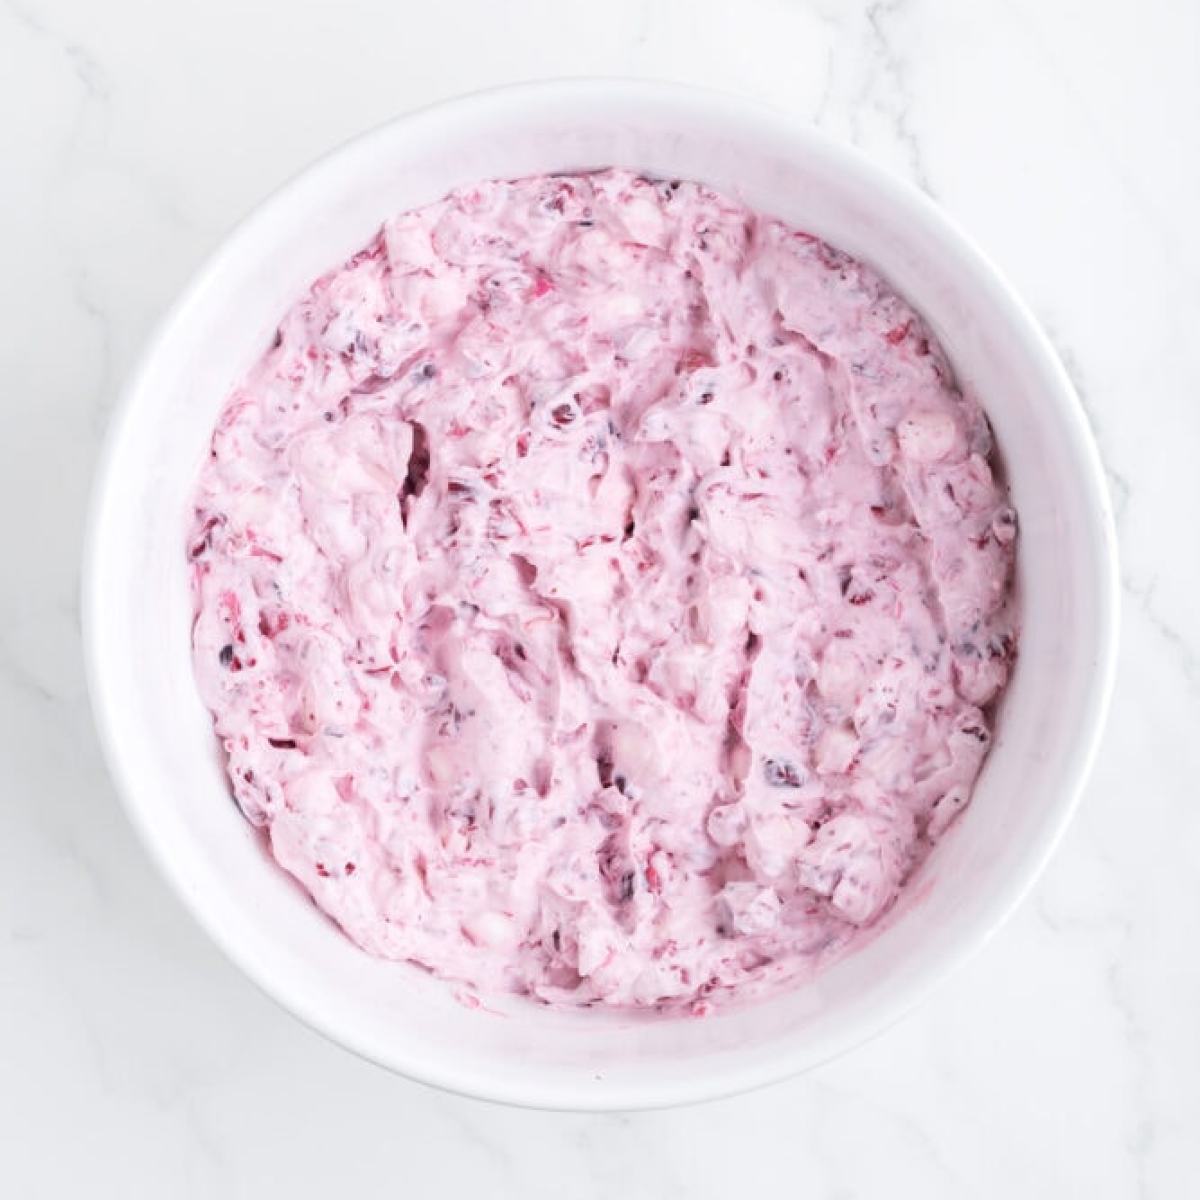 cranberry fluff mixed in a bowl